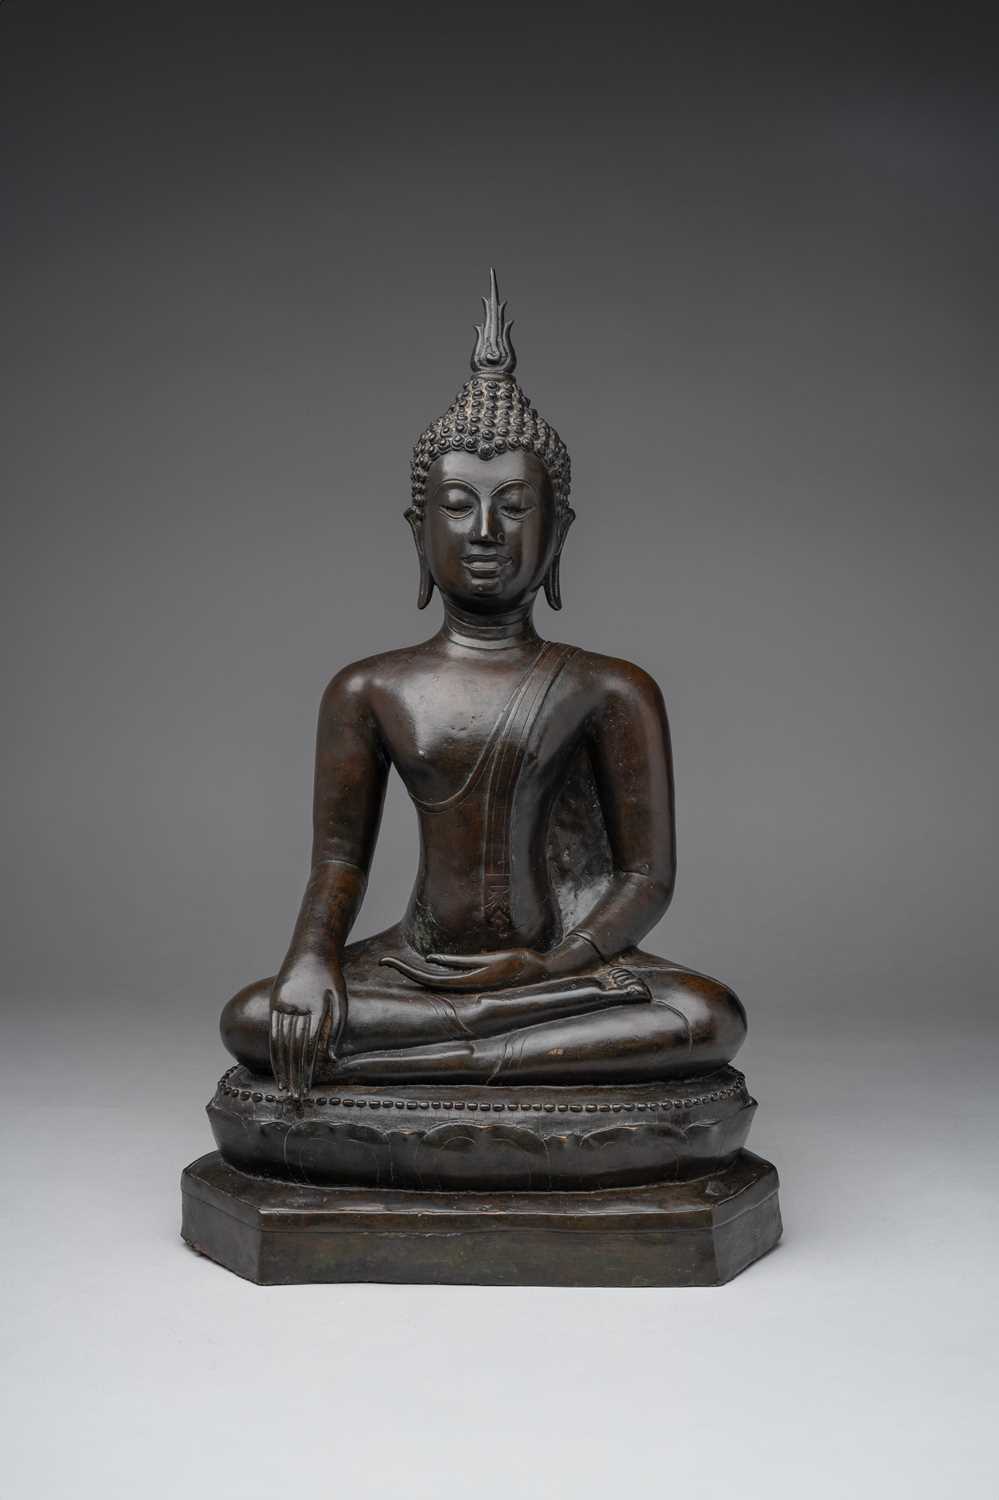 A GOOD NORTHERN SUKHOTHAI BRONZE FIGURE OF BUDDHA THAILAND, C.15TH CENTURY Depicted seated in